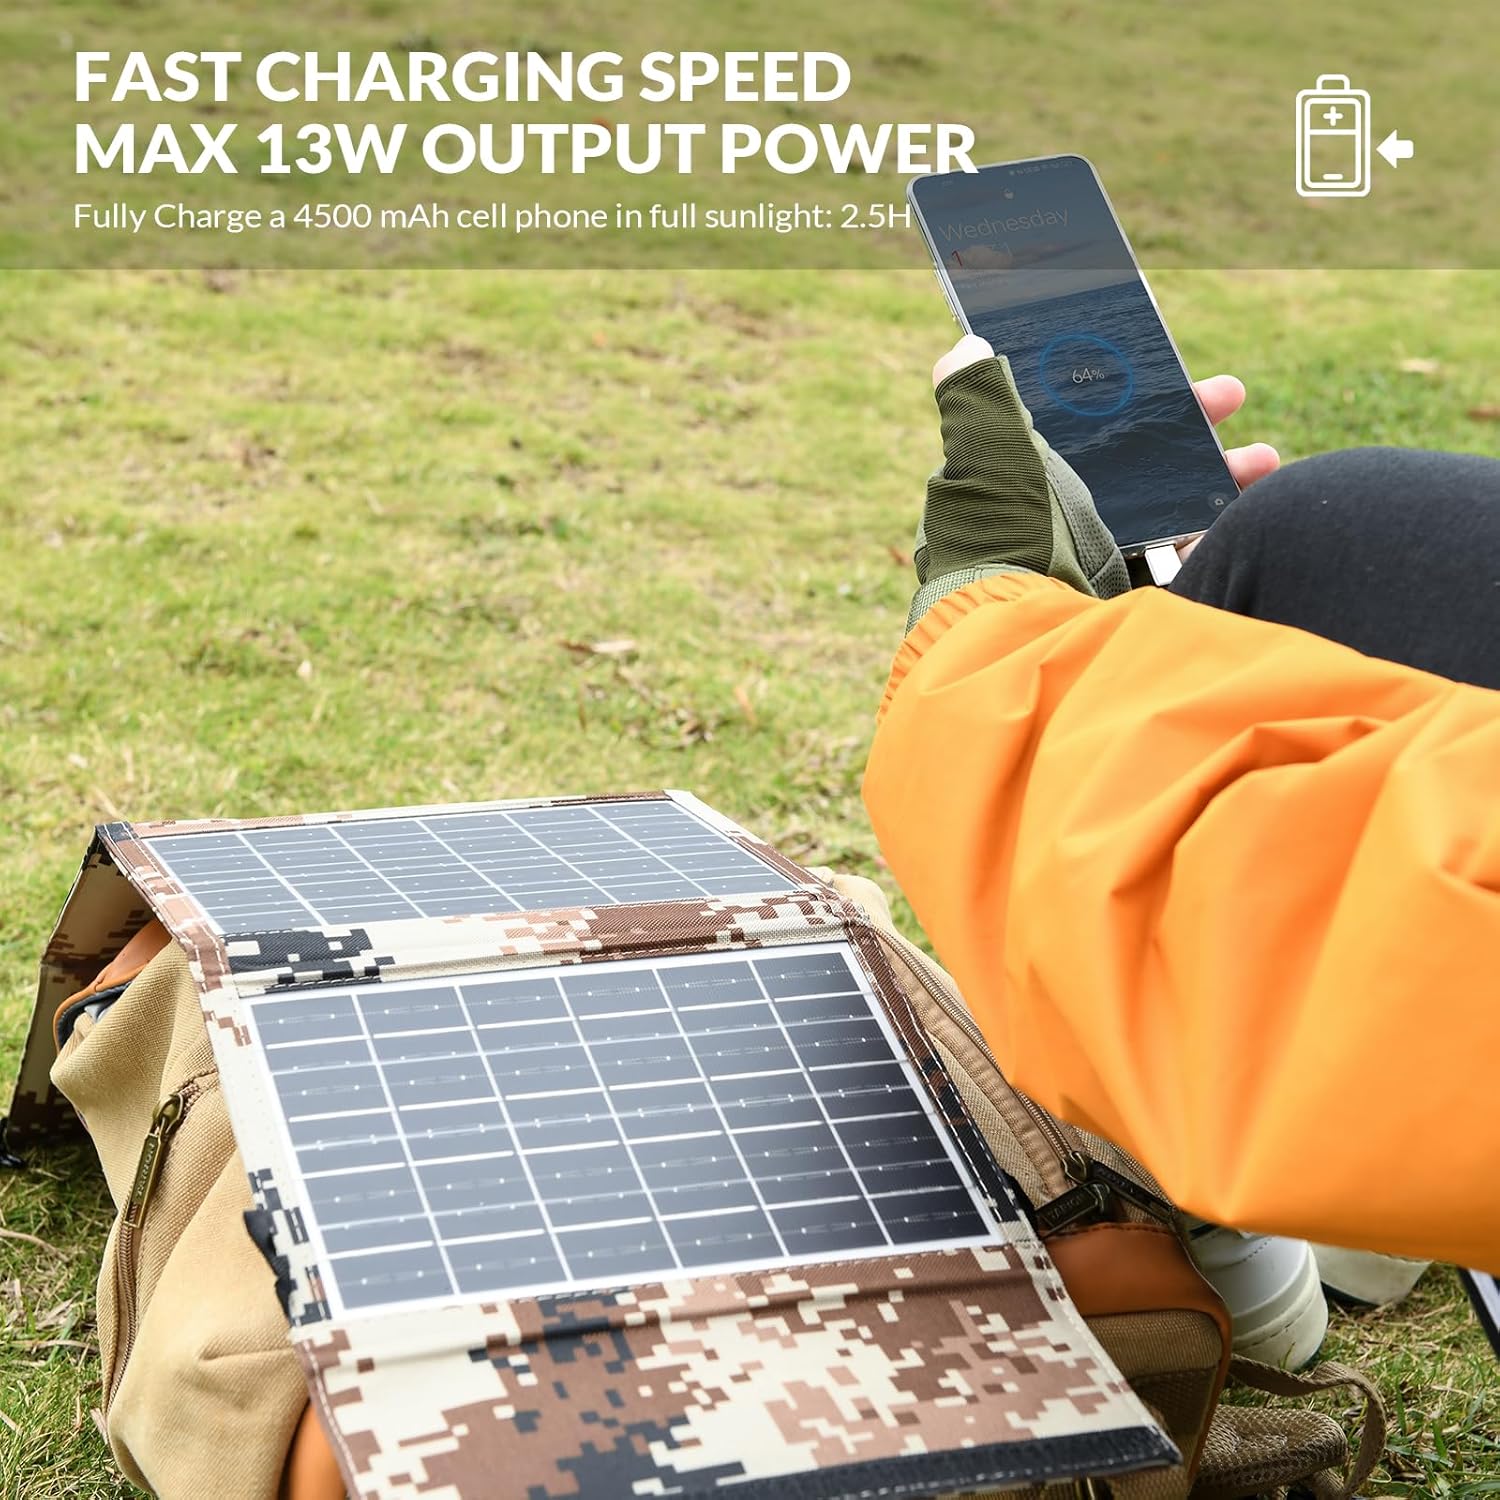 Max 13W Portable Solar Panel Charger Review